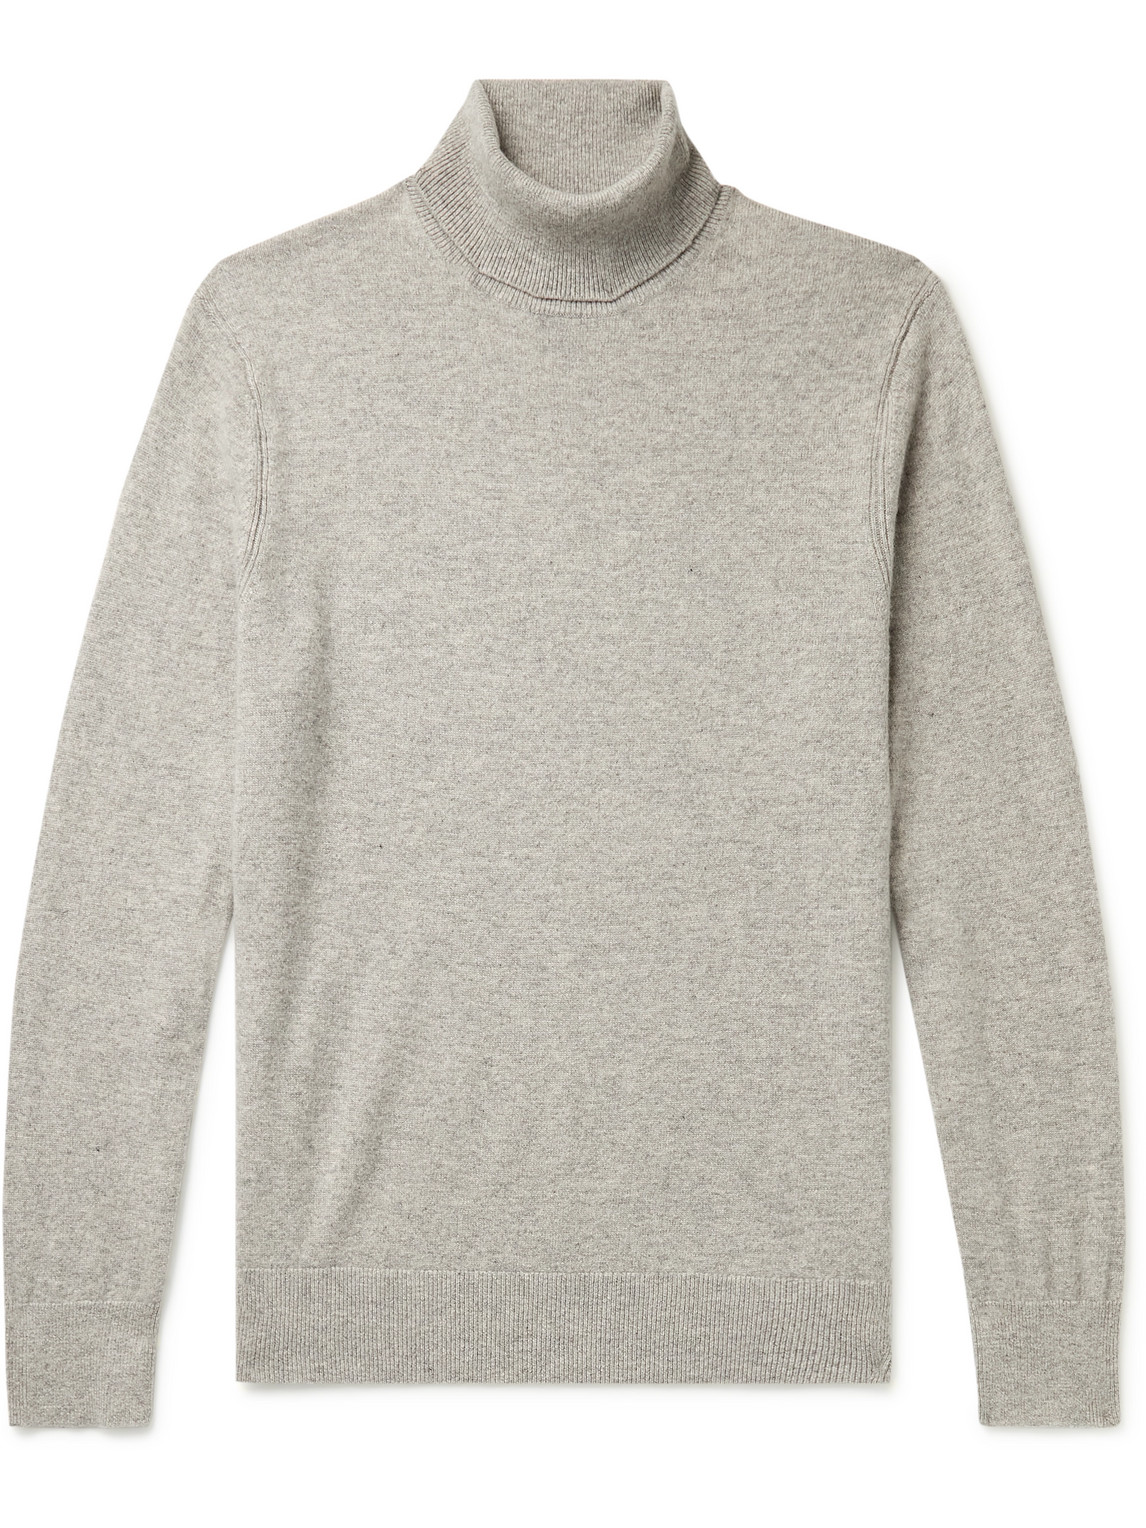 CLUB MONACO RECYCLED CASHMERE ROLLNECK SWEATER